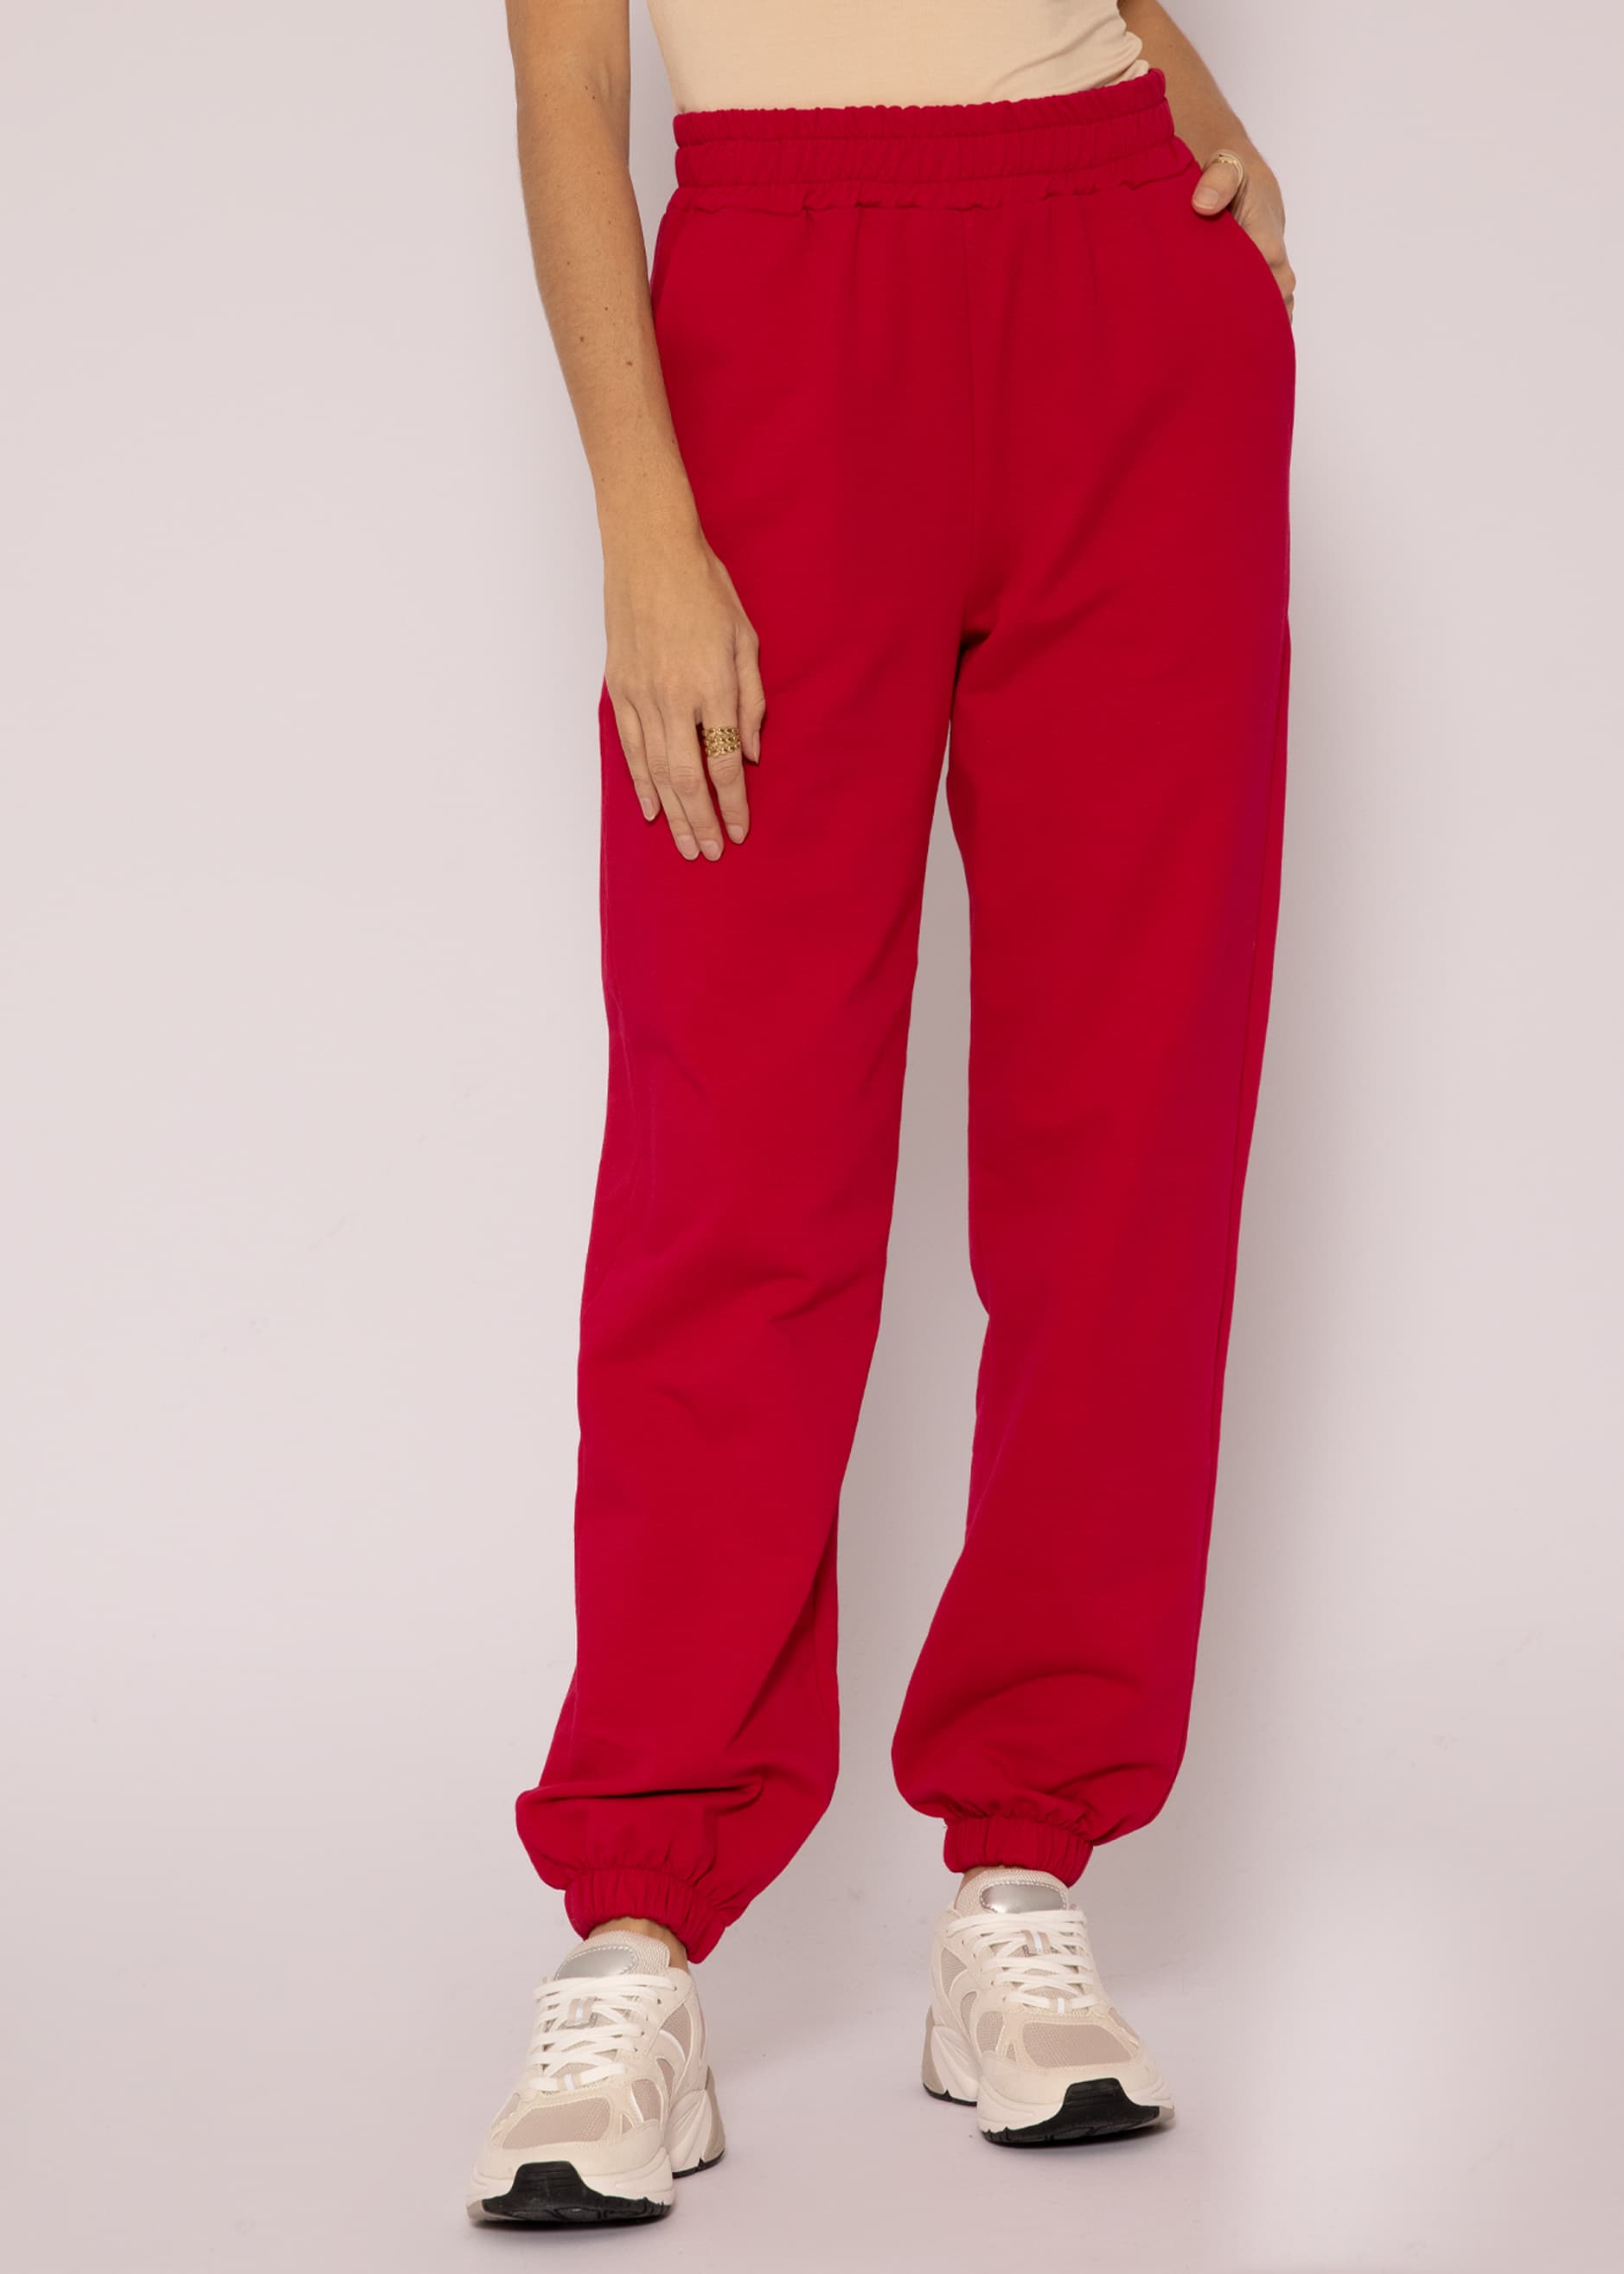 Jogger pants, cherry red | Trousers | Clothing | SALE | SassyClassy.com